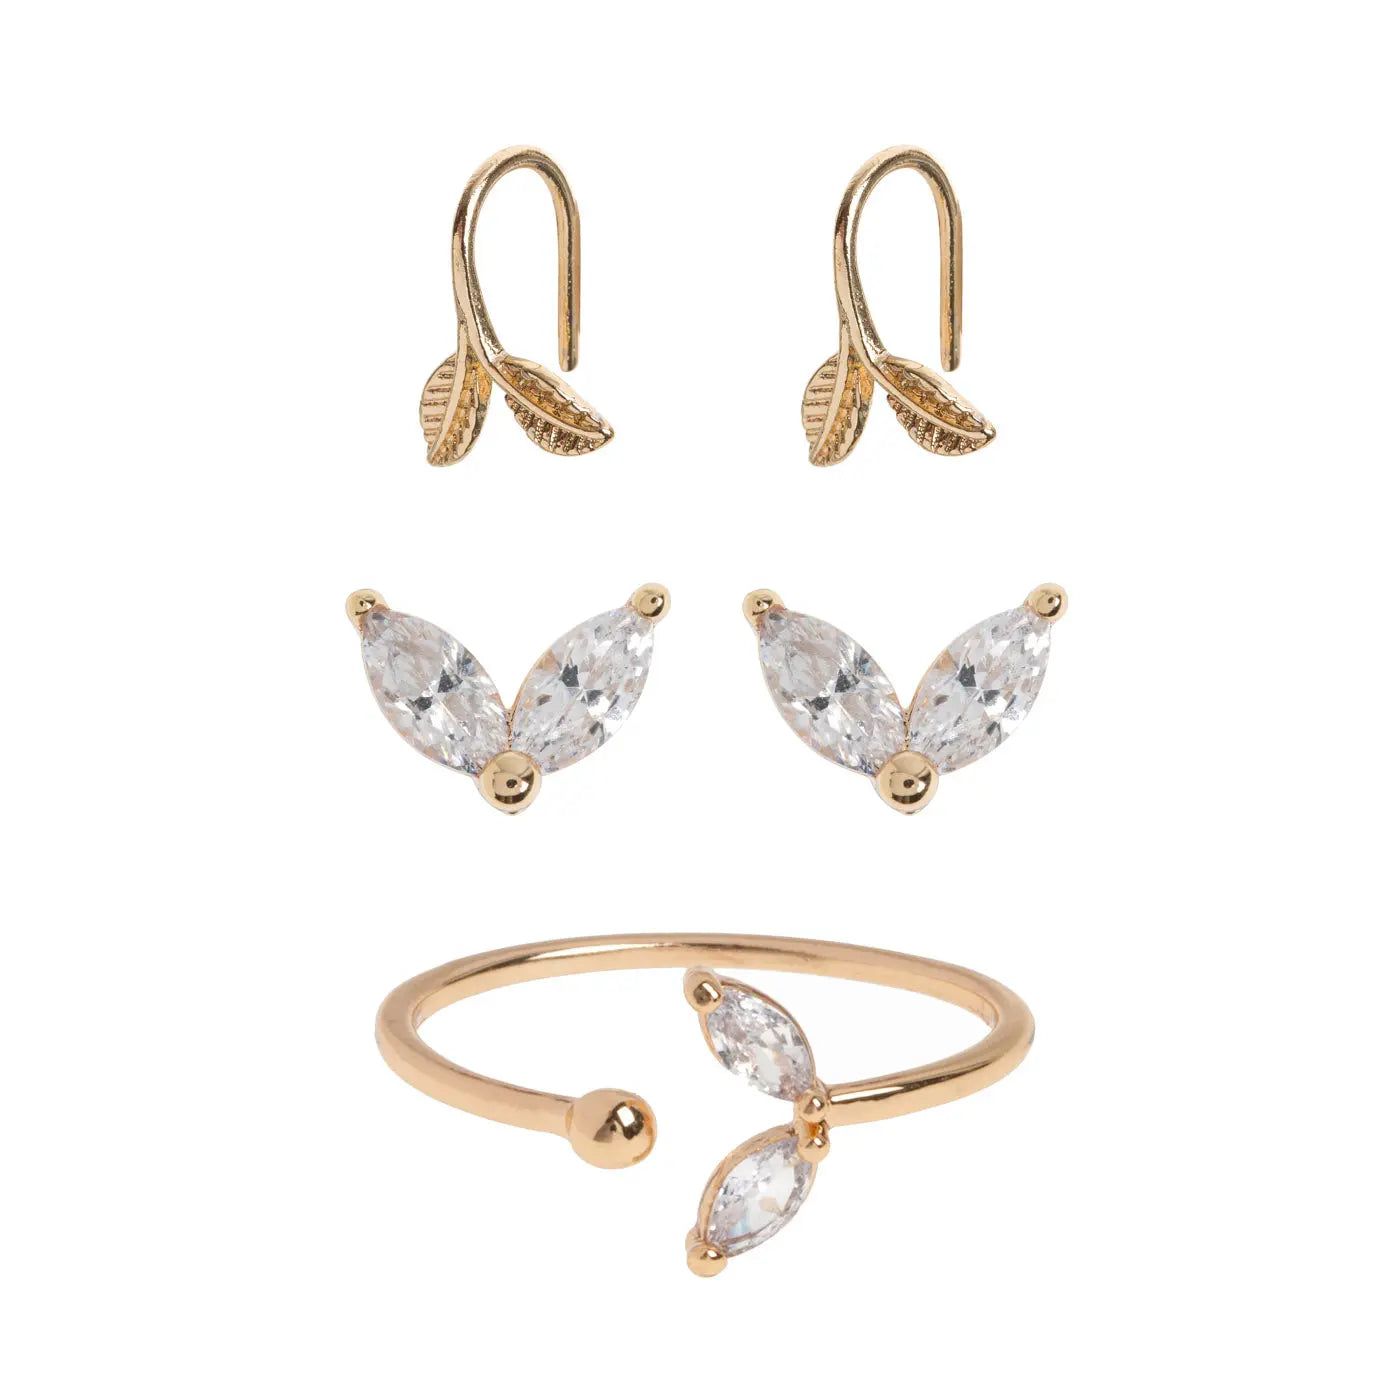 Crystal Leaf Set Ring and Earrings